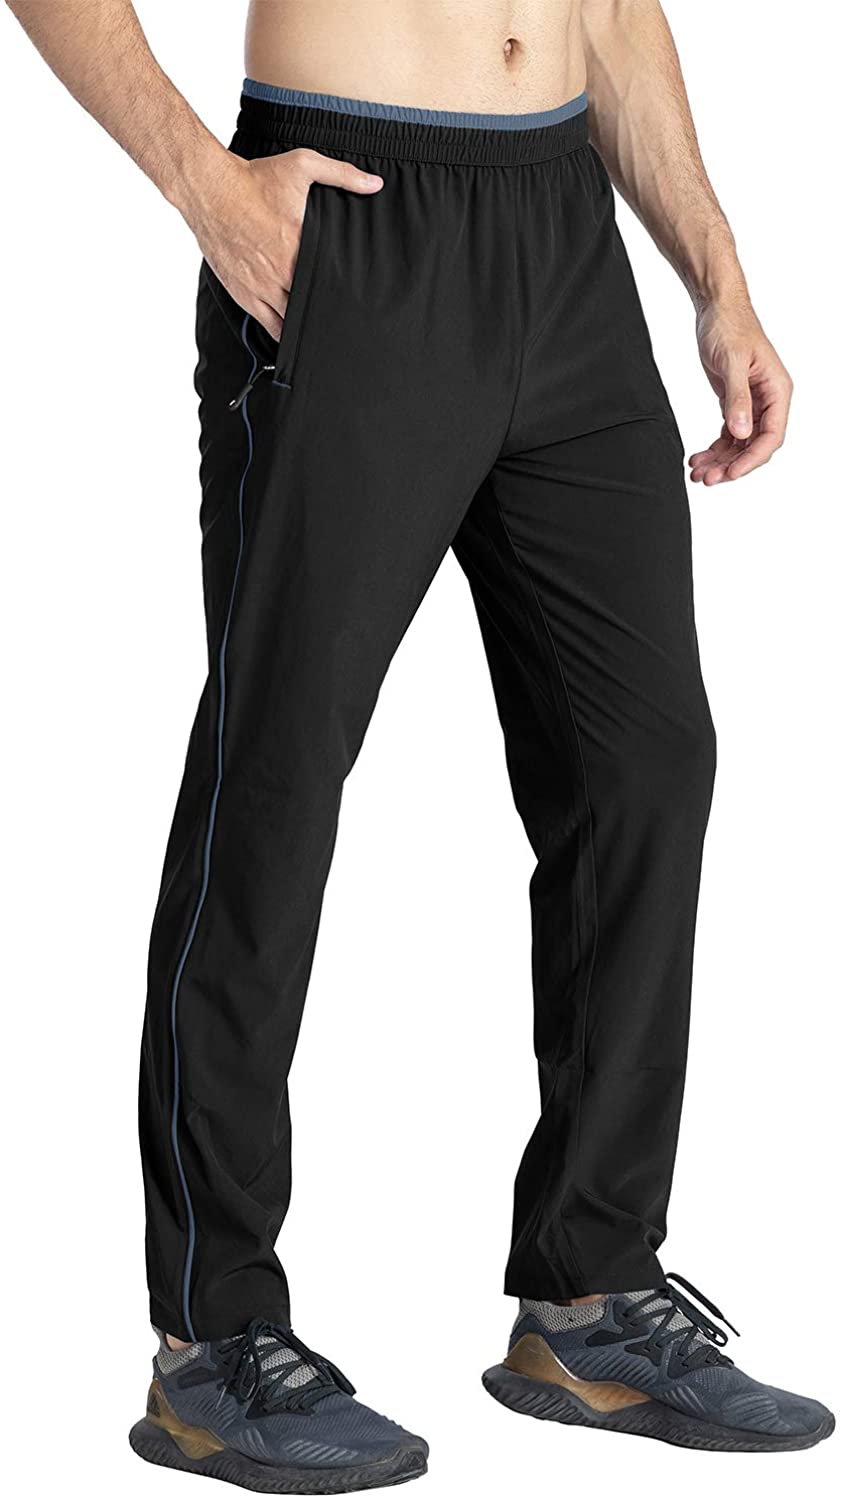 YSENTO Mens Running Pants Lightweight Breathable Sport Joggers Athletic Pants Zipper Pockets 